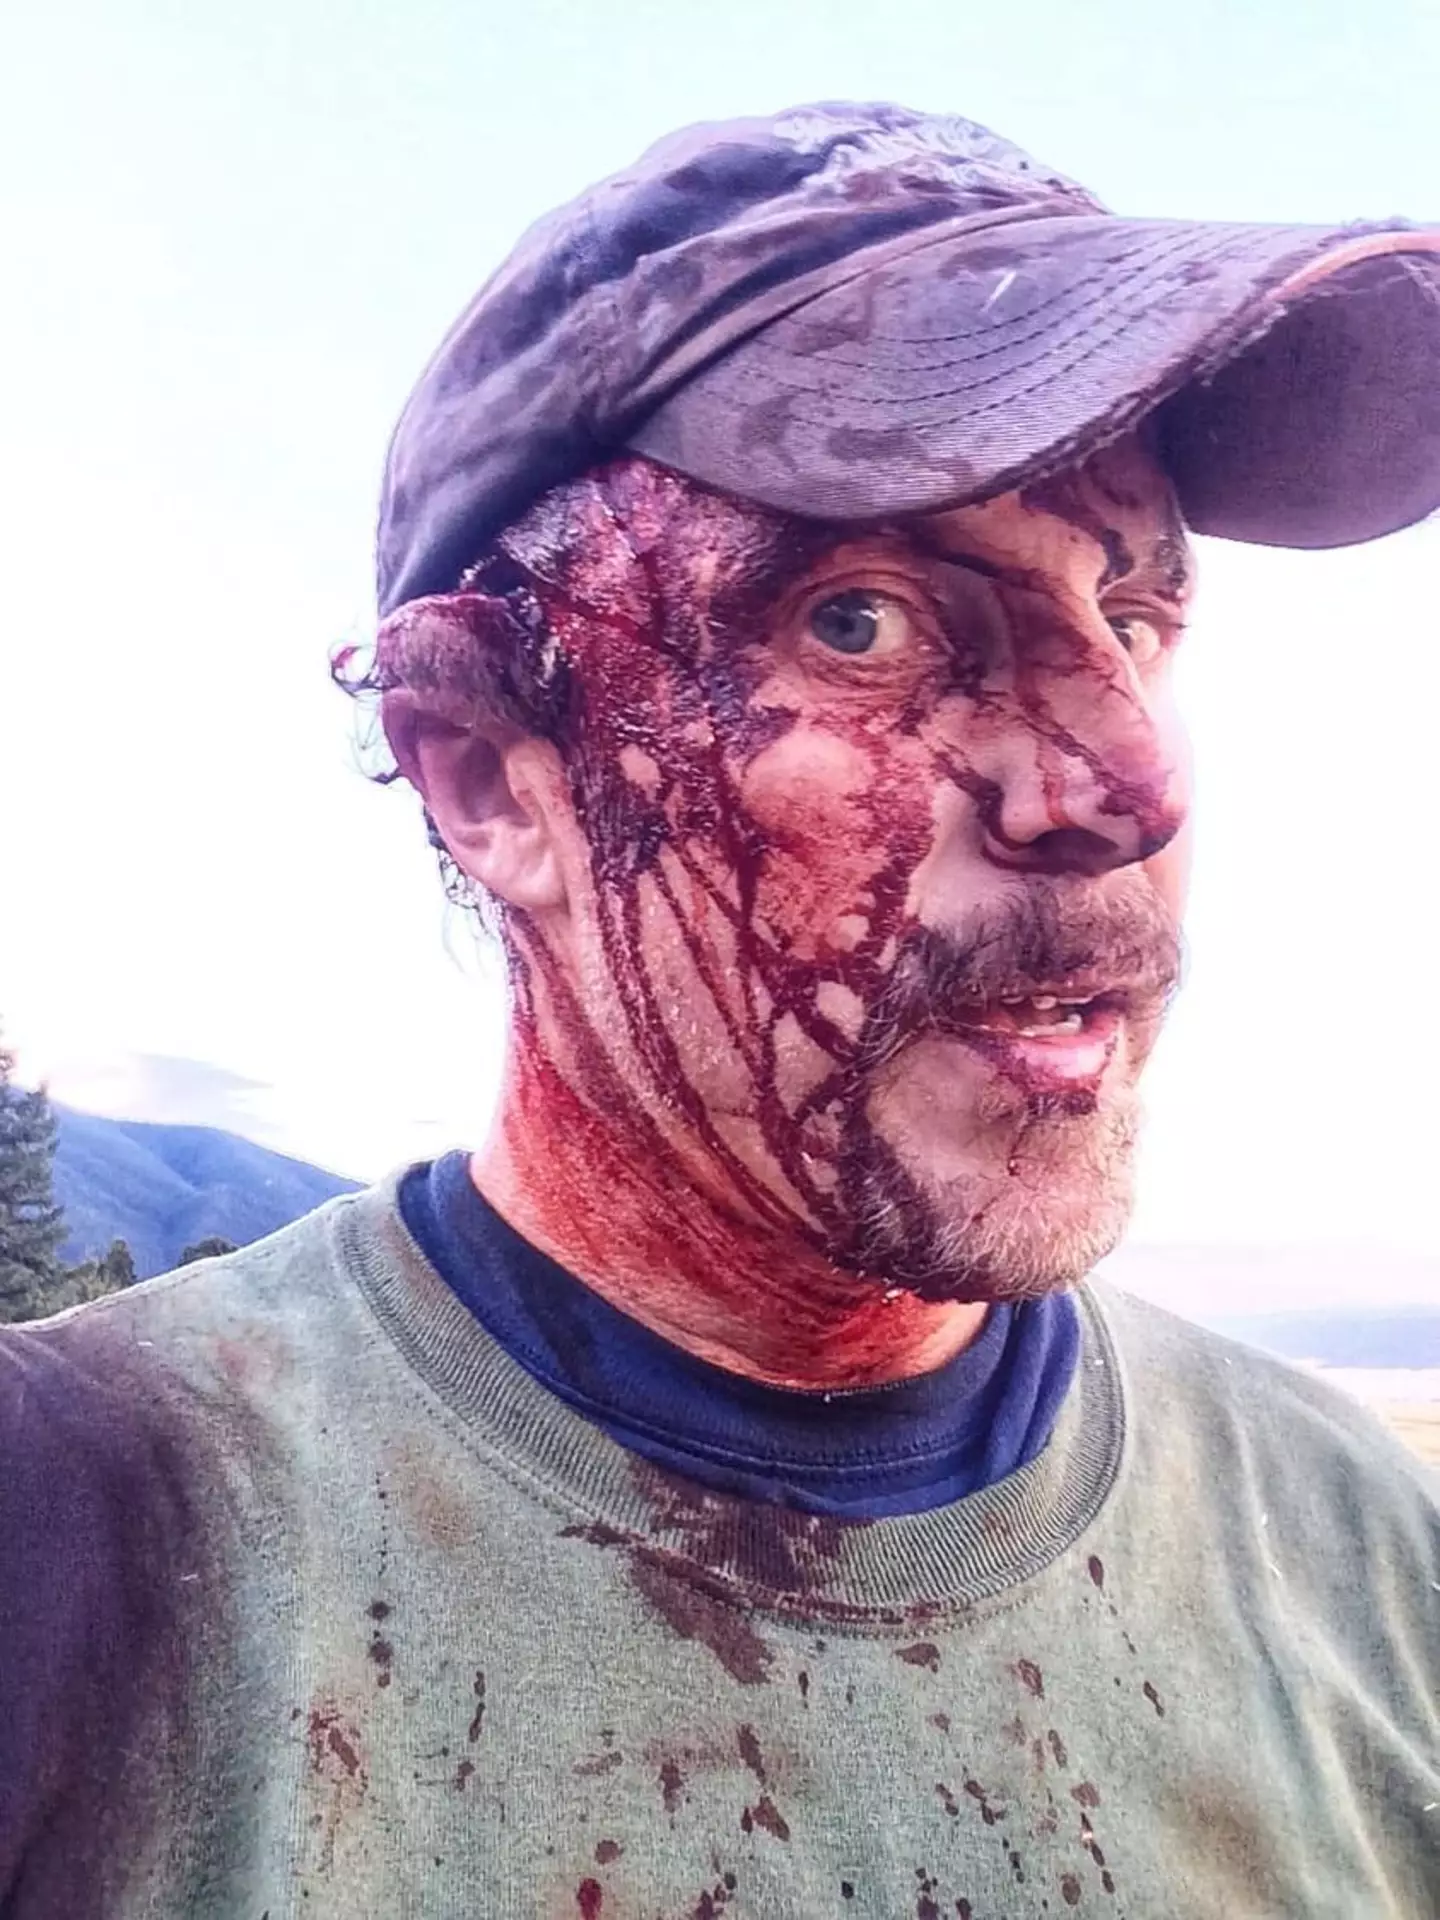 Todd Orr showed exactly what the aftermath of a bear attack looks like.